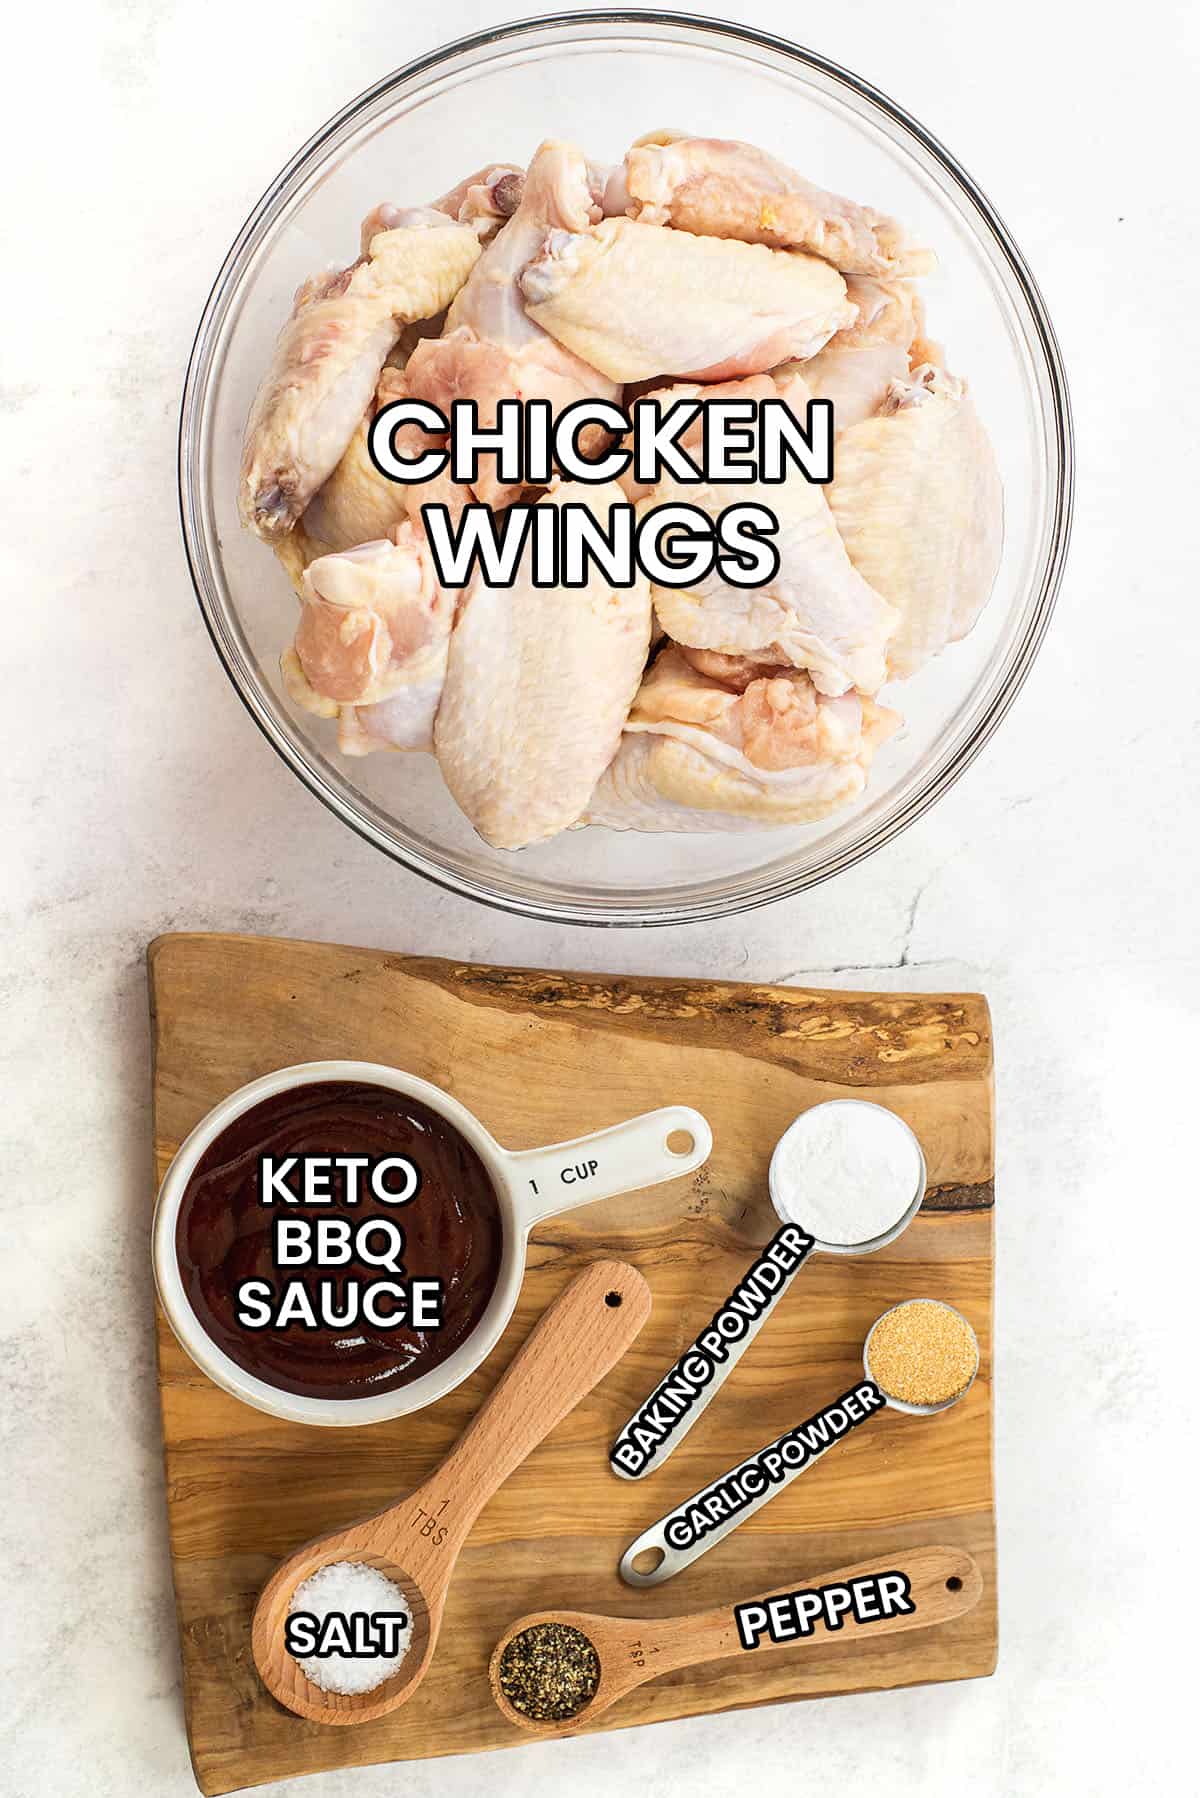 Ingredients for keto bbq wings.